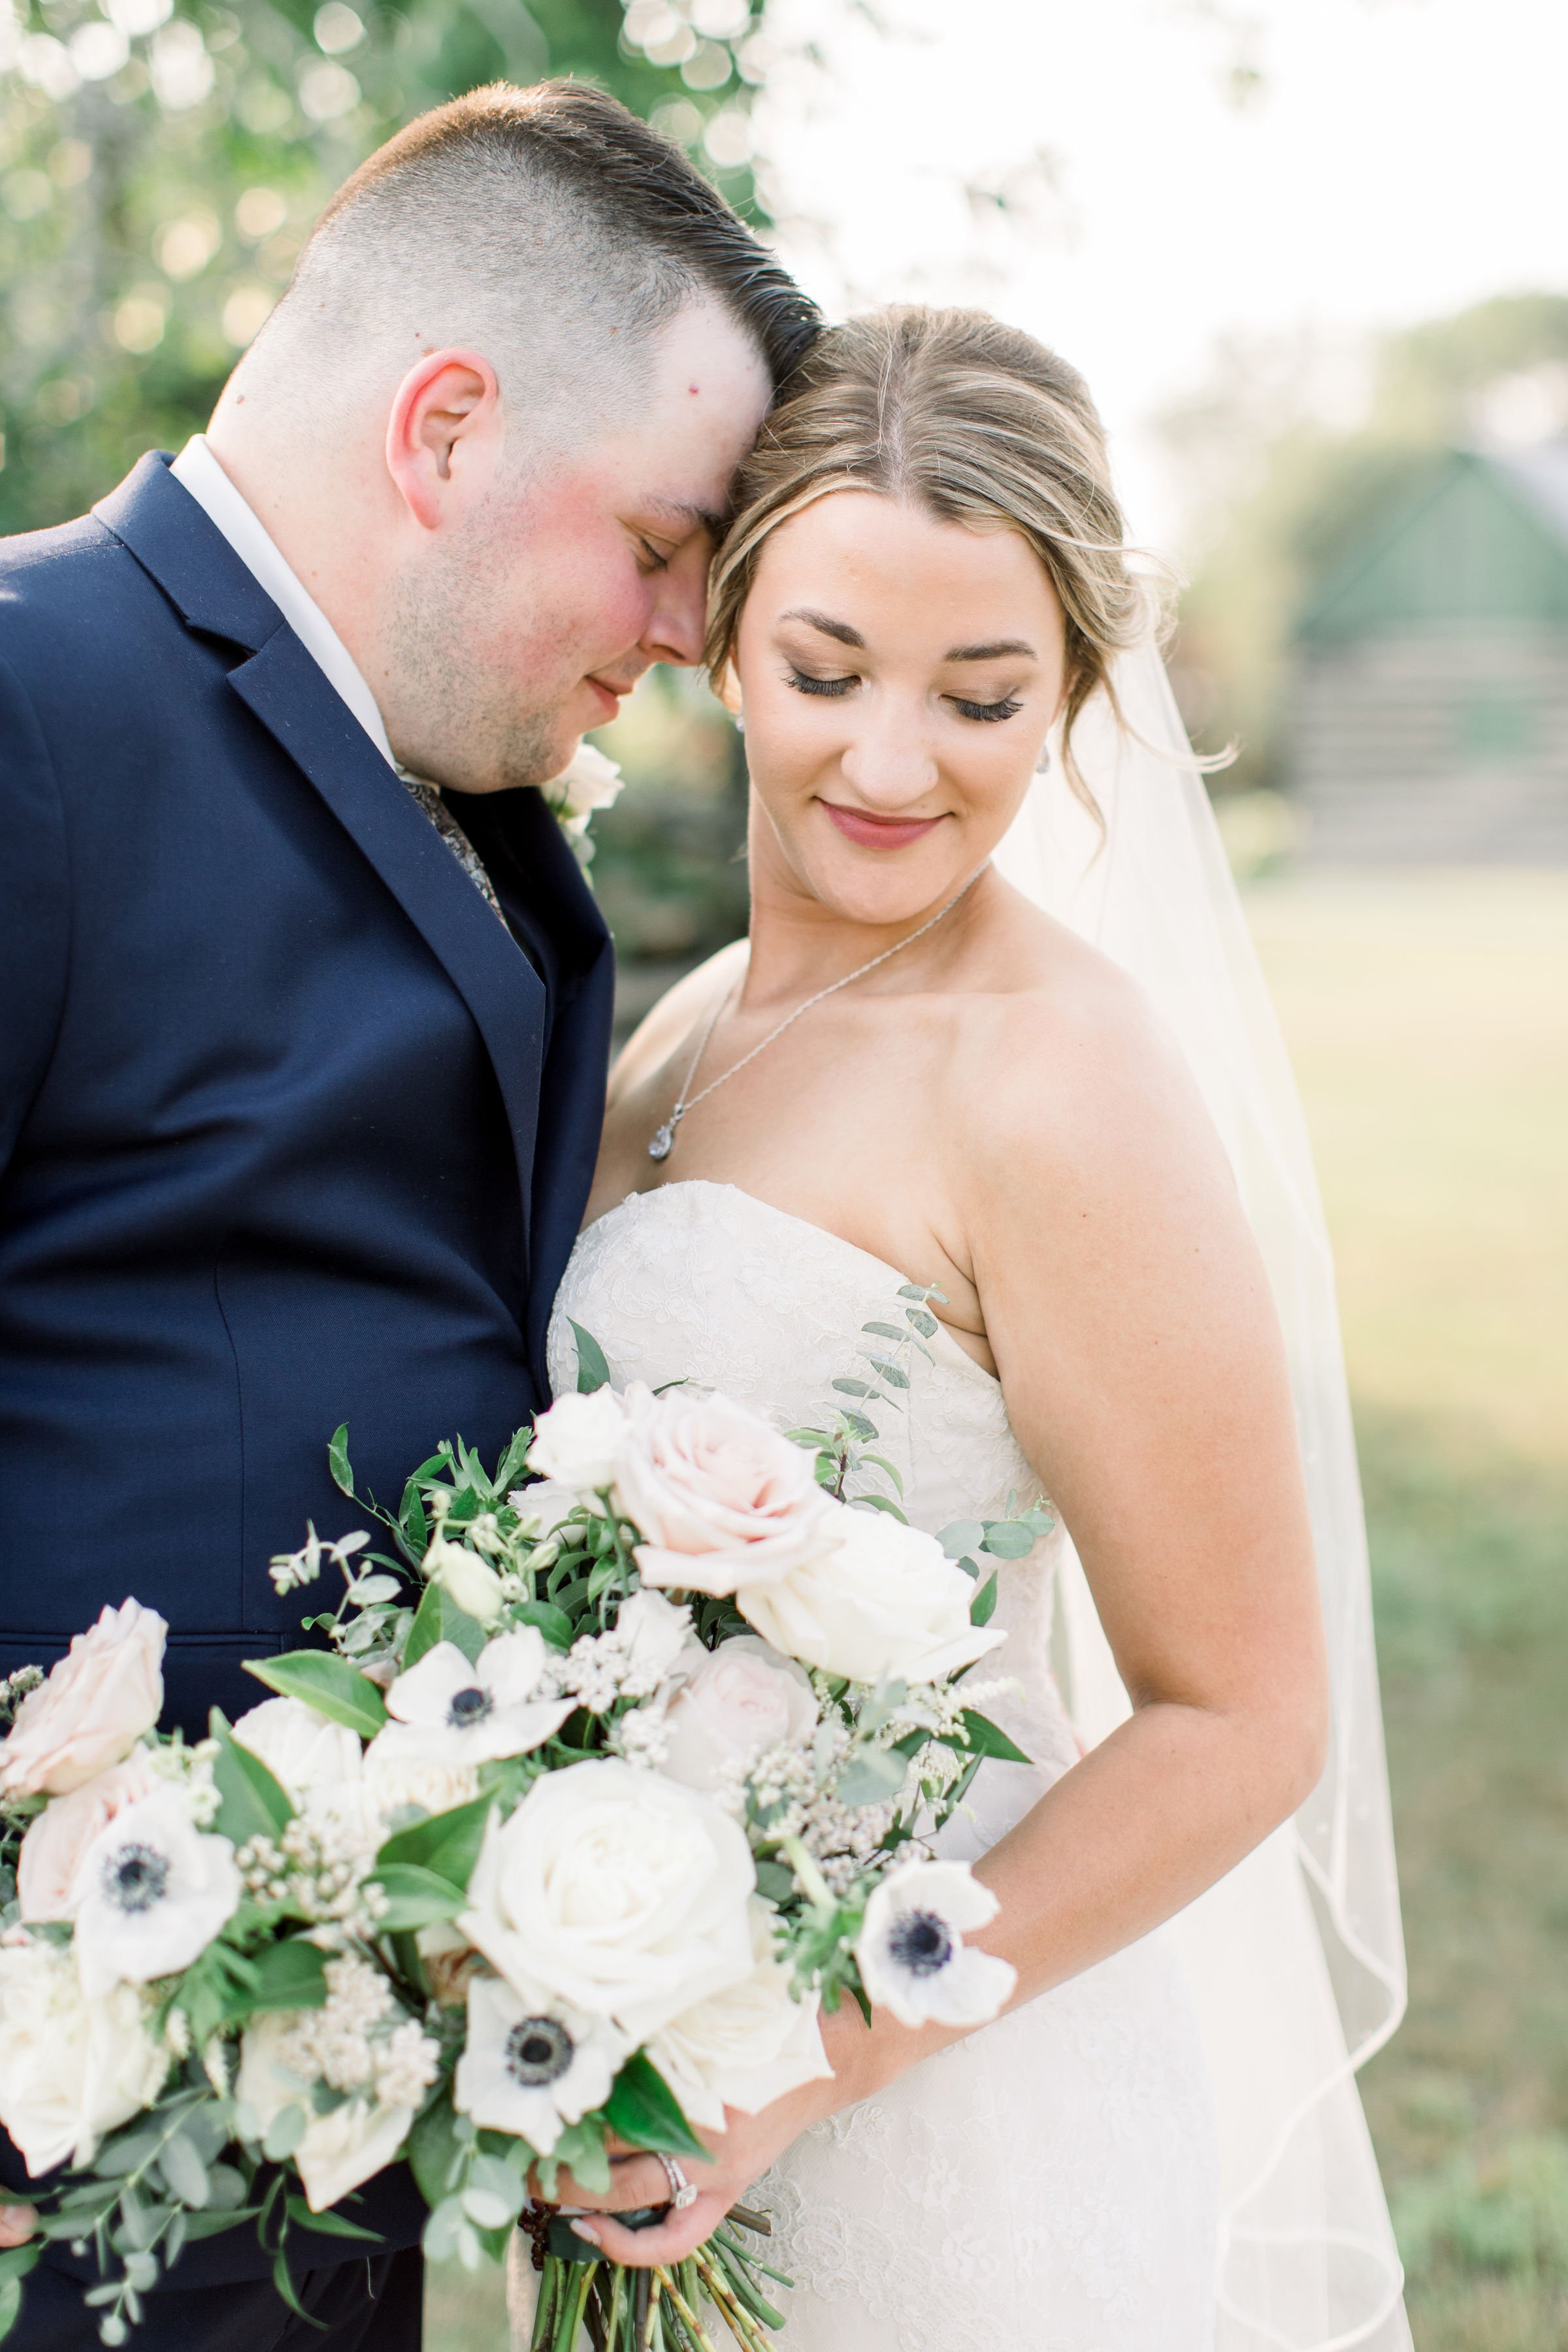  Elegant wedding portrait with the bride looking down and groom snuggling her by Chelsea Mason Photography. bride looking down #StonefieldEstates #Ontarioweddings #Chelseamasonphotography #Chelseamasonengagements #Ontarioweddingphotographers 